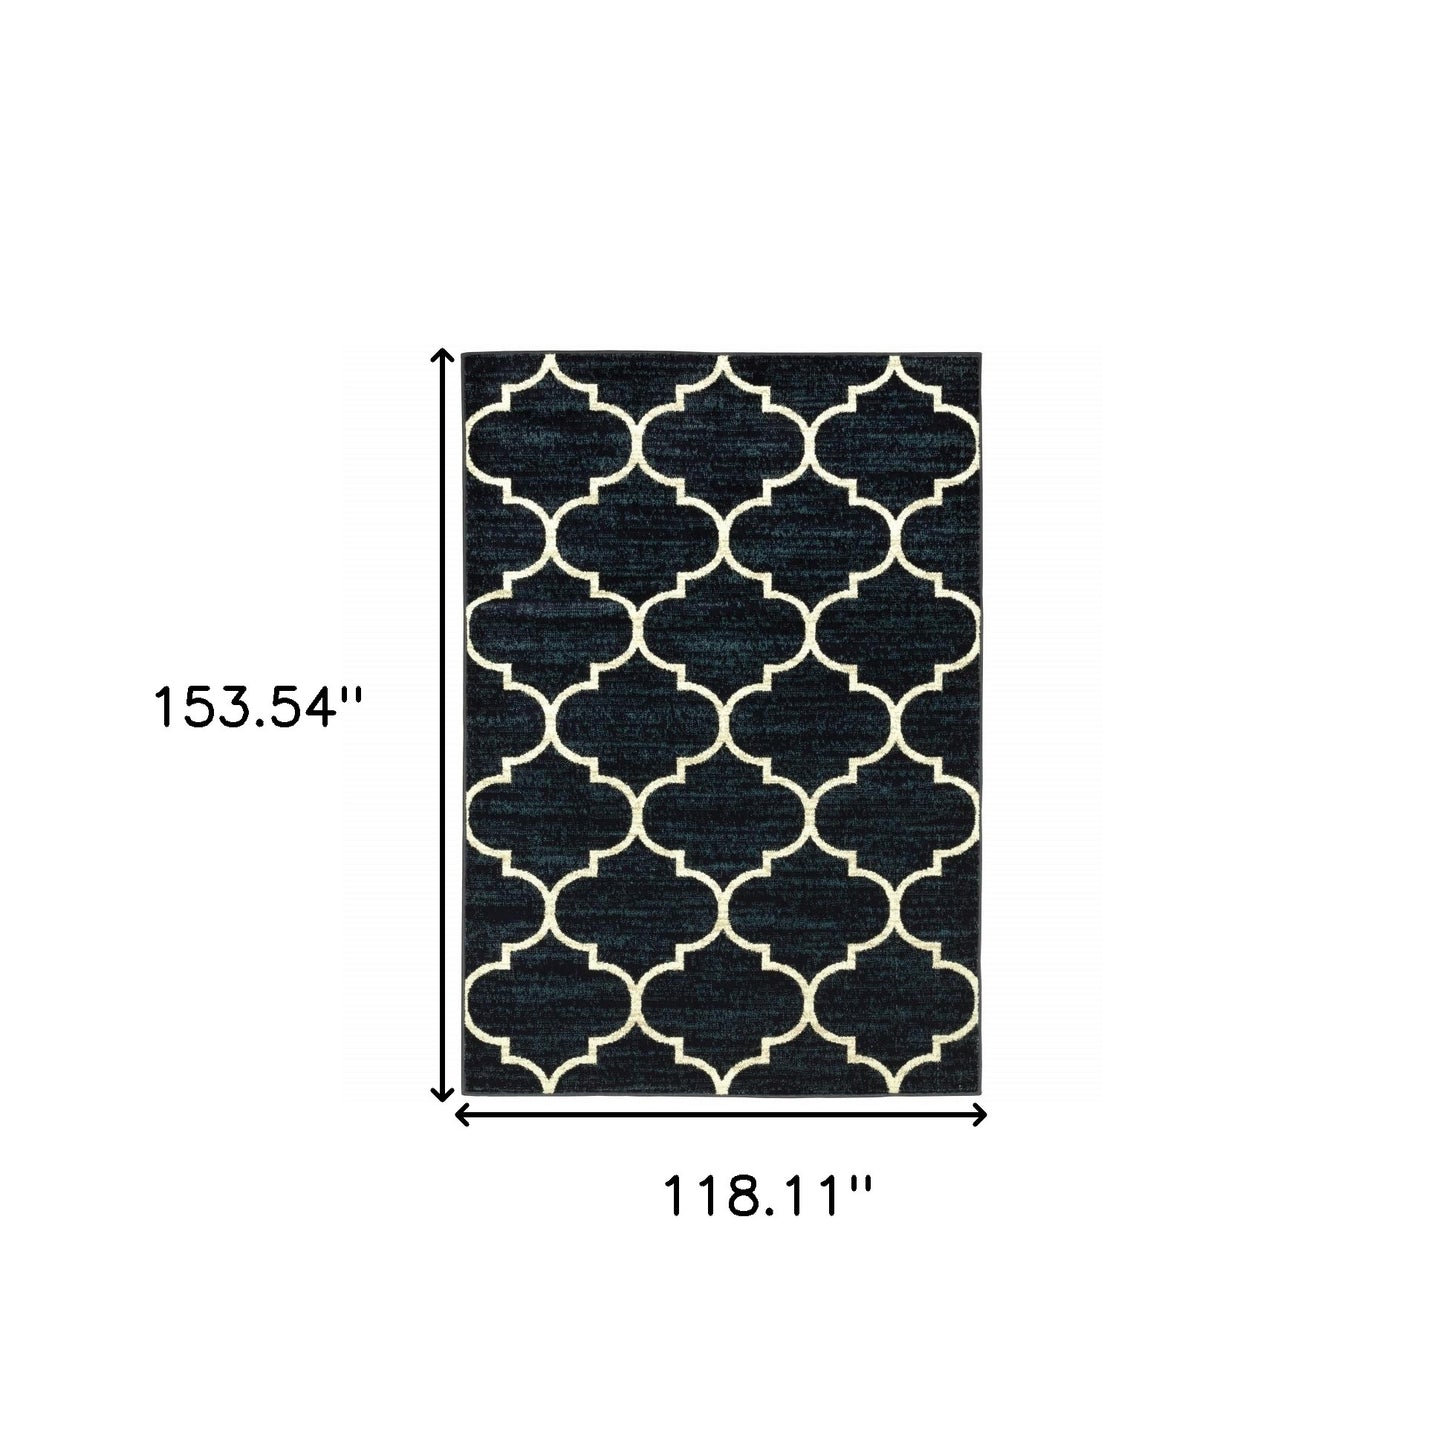 10' X 13' Navy And Ivory Geometric Power Loom Stain Resistant Area Rug